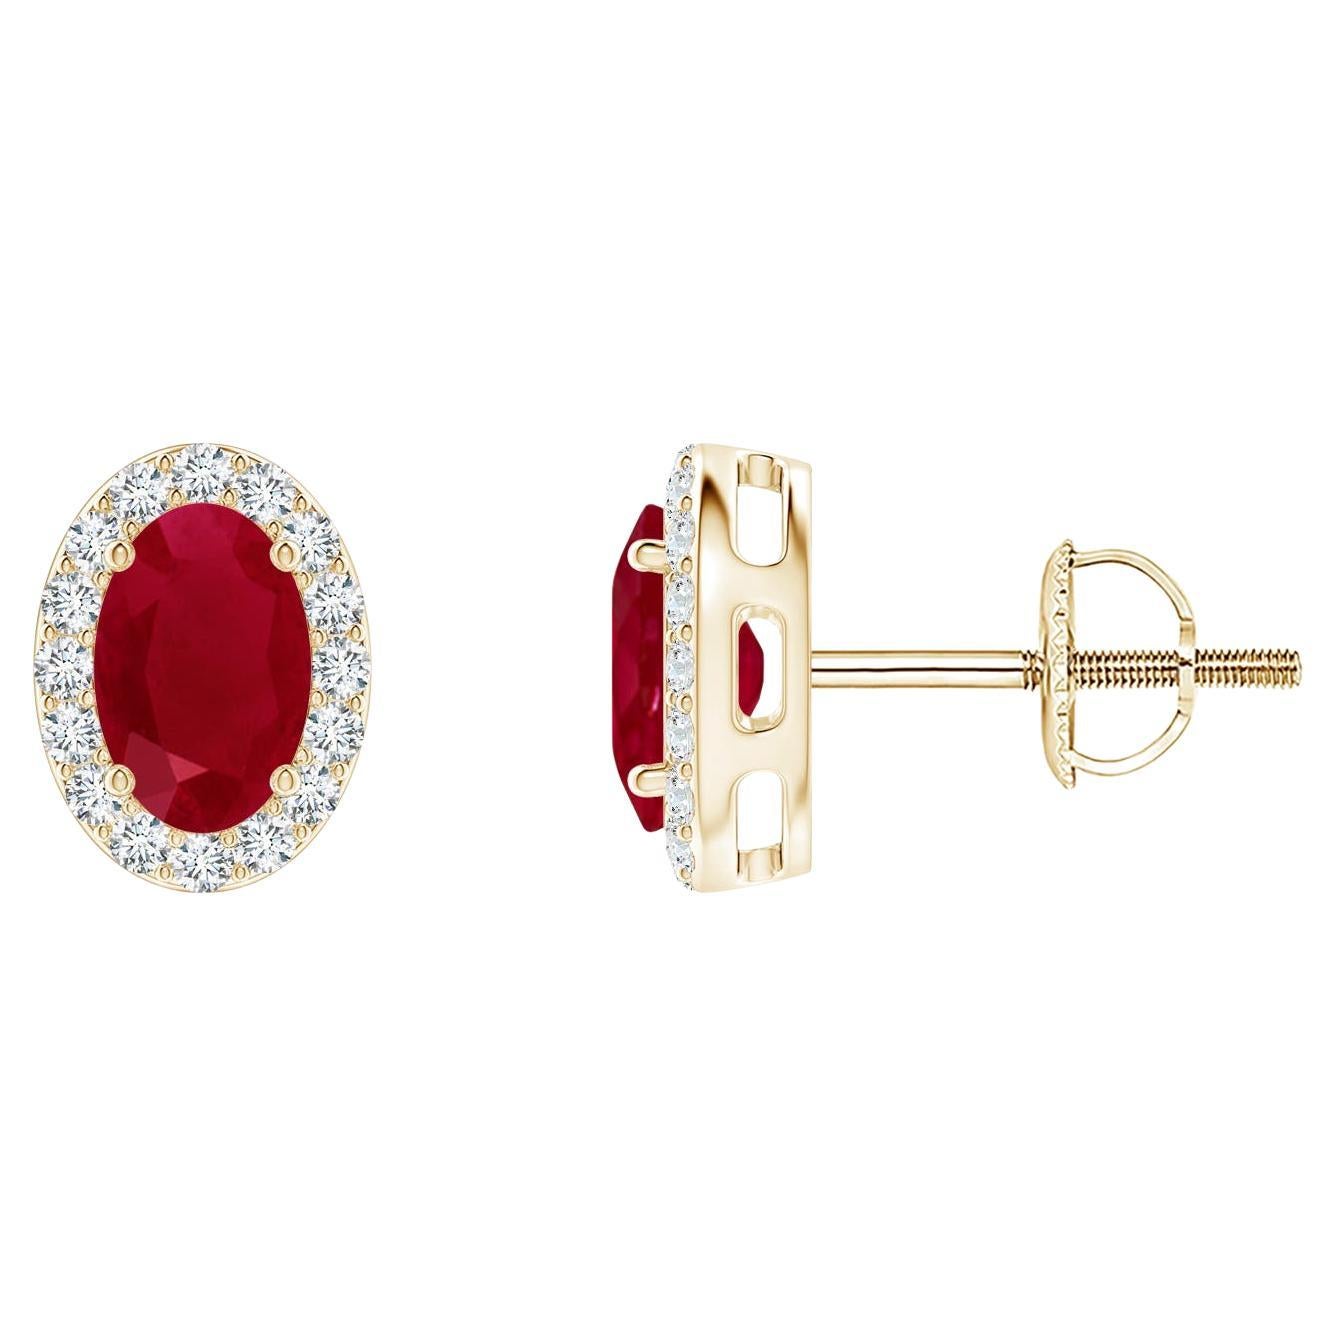 ANGARA Natural Oval 1.20ct Ruby Studs with Diamond Halo in 14K Yellow Gold